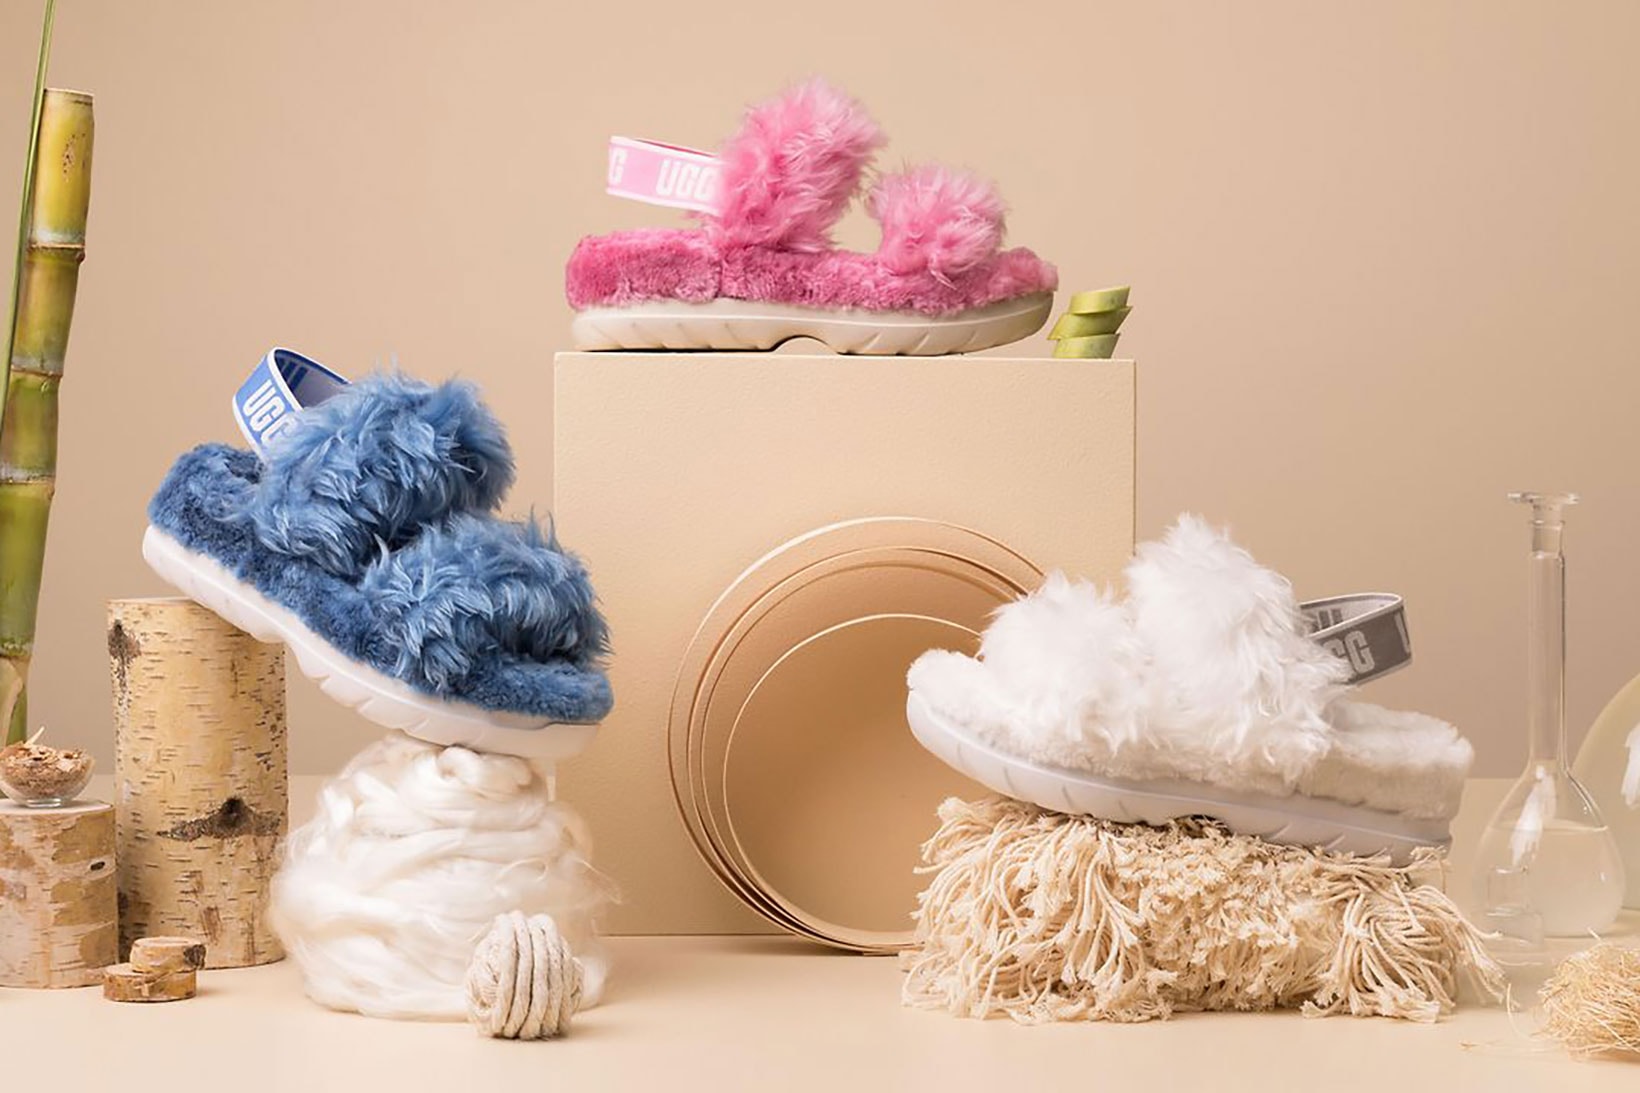 ugg plant power collection fluff sugar sandal sustainable pink blue white